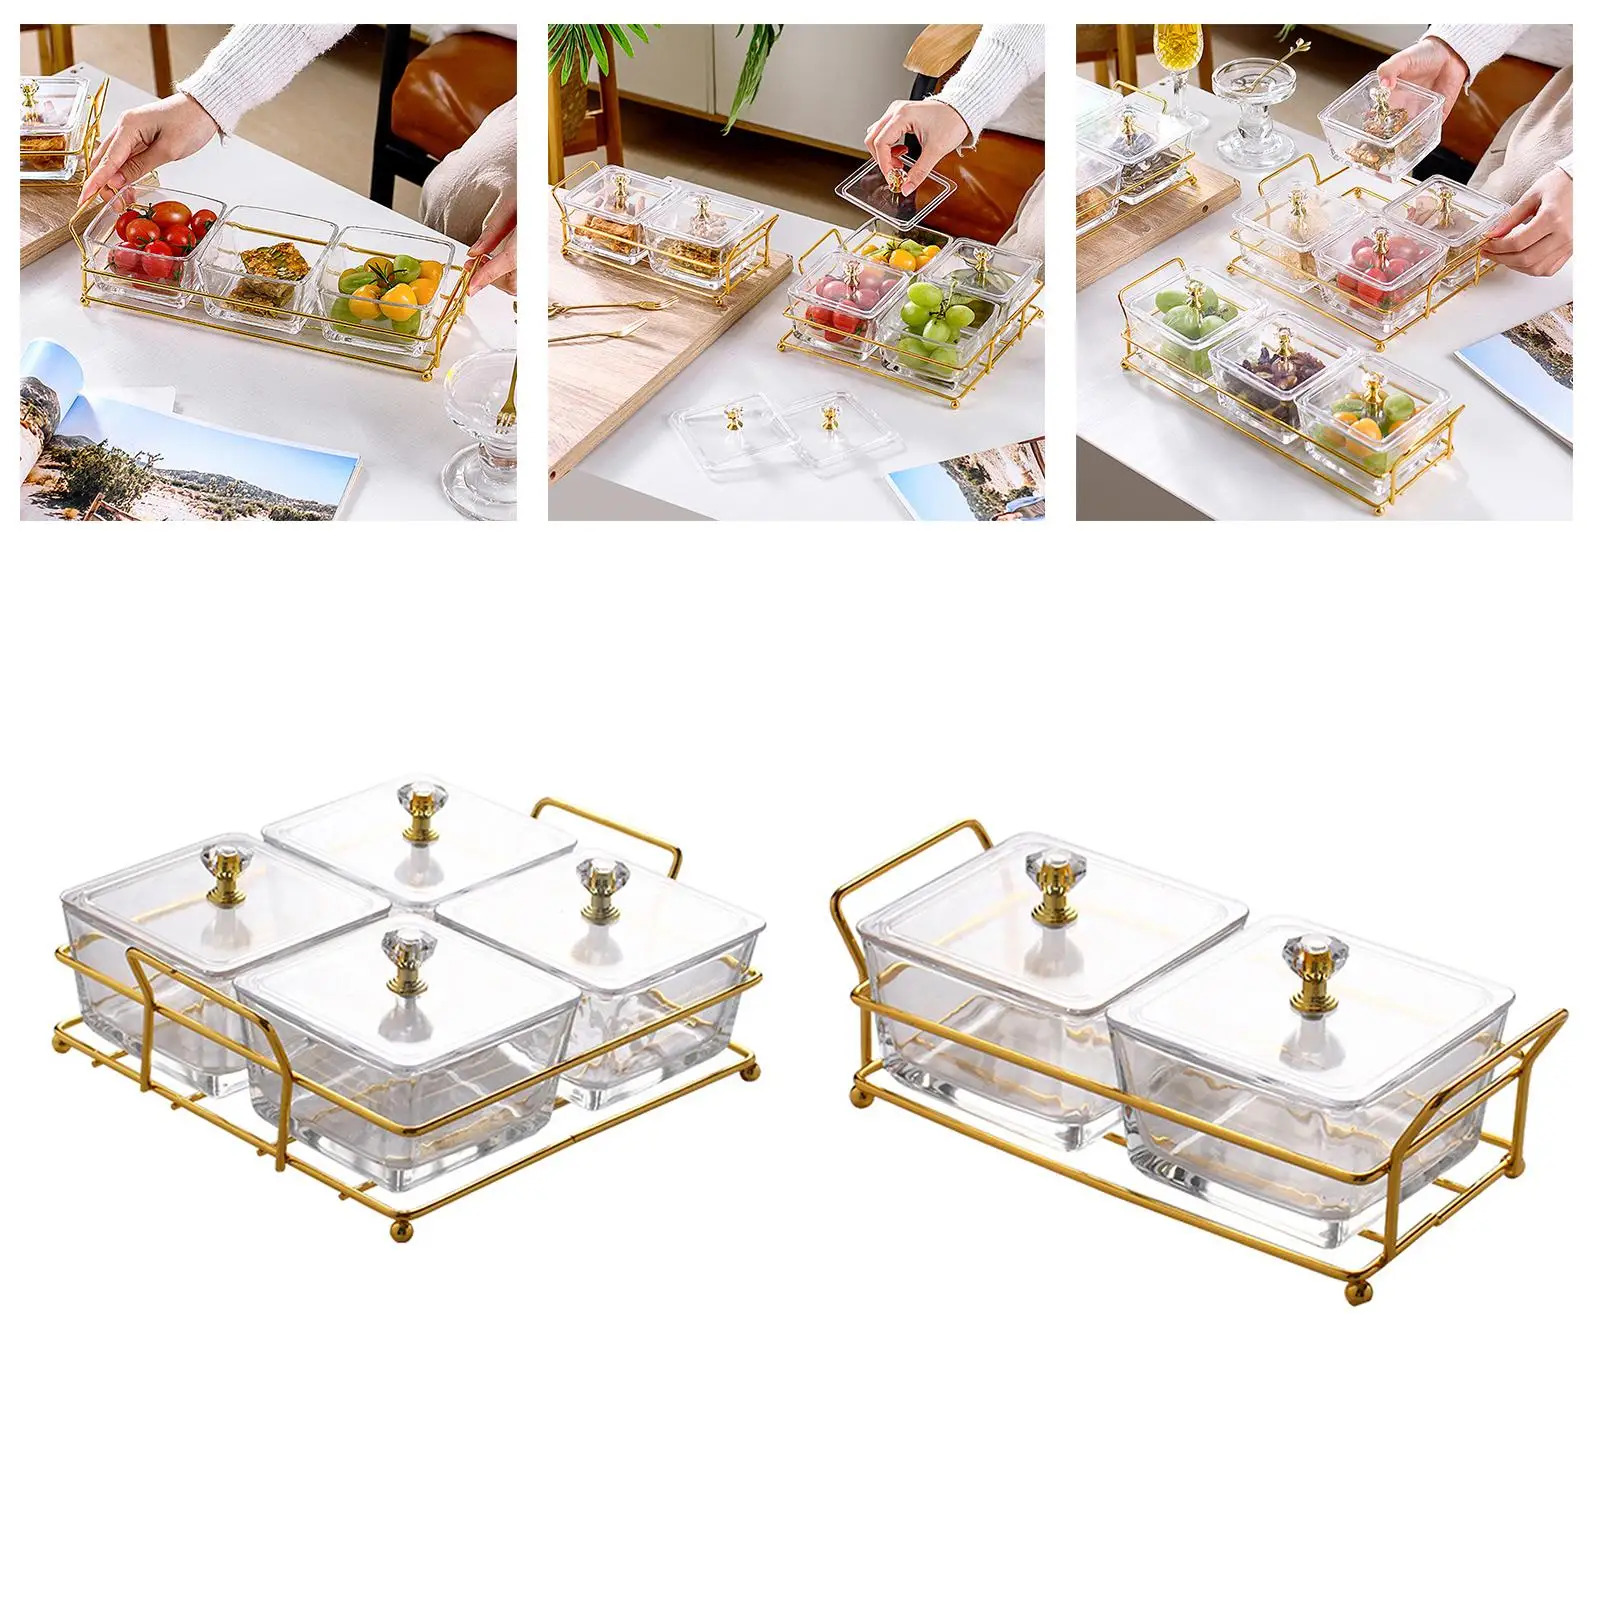 Fruit Tray with Lid Metal Stand Transparent Storage Organizer Snack Plate for Restaurant Living Room Home Countertop